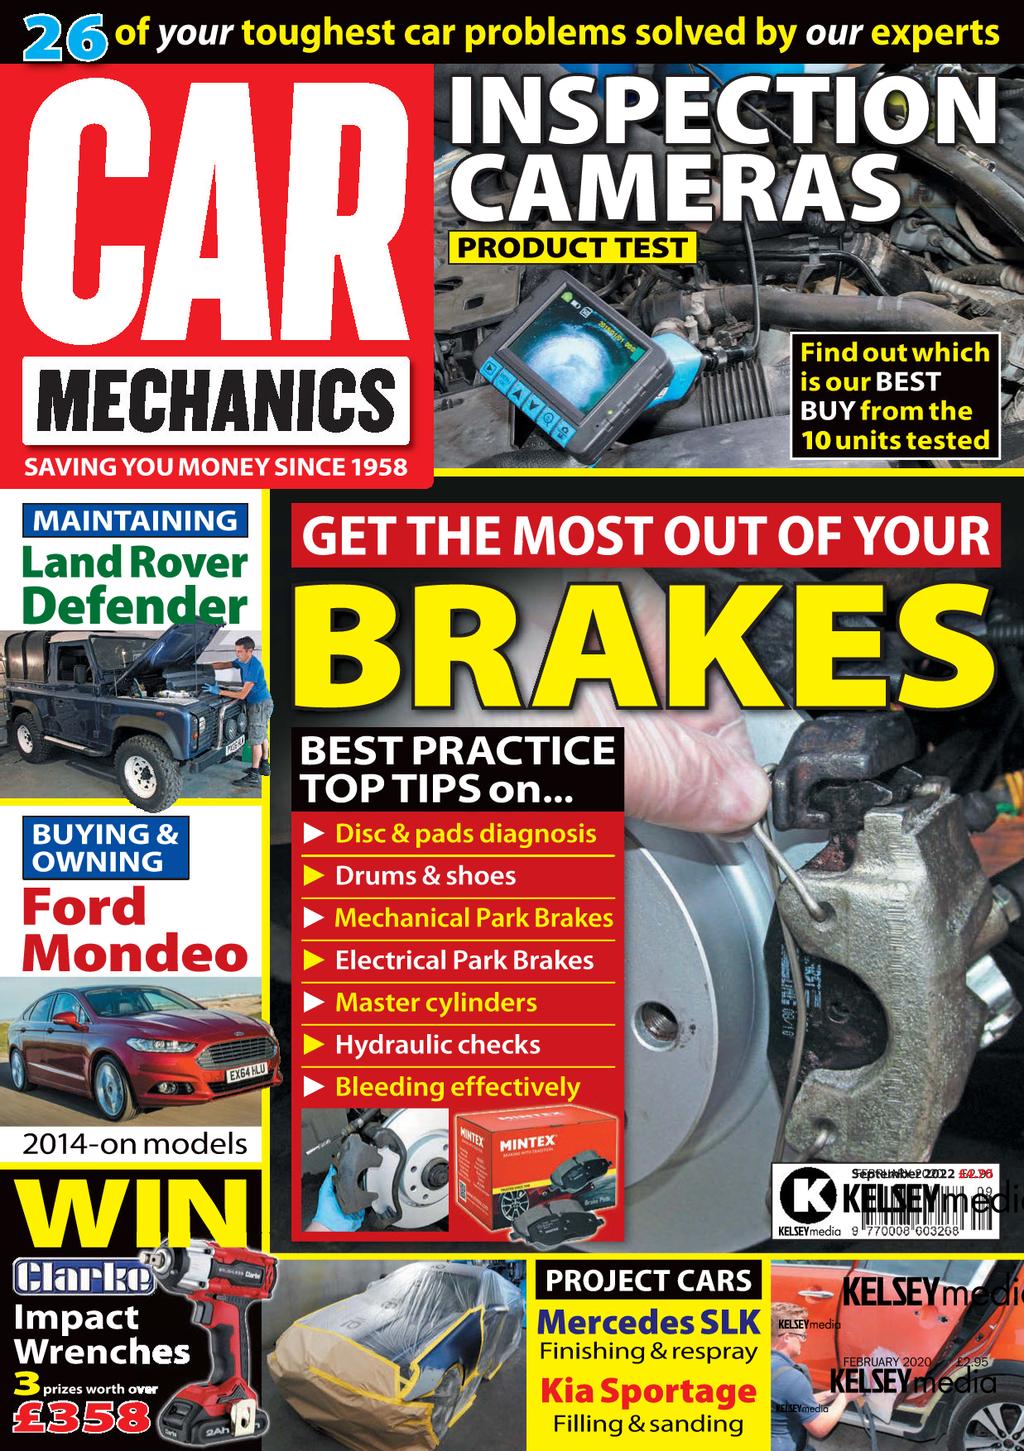 486139 Car Mechanics Cover 2022 August 19 Issue 